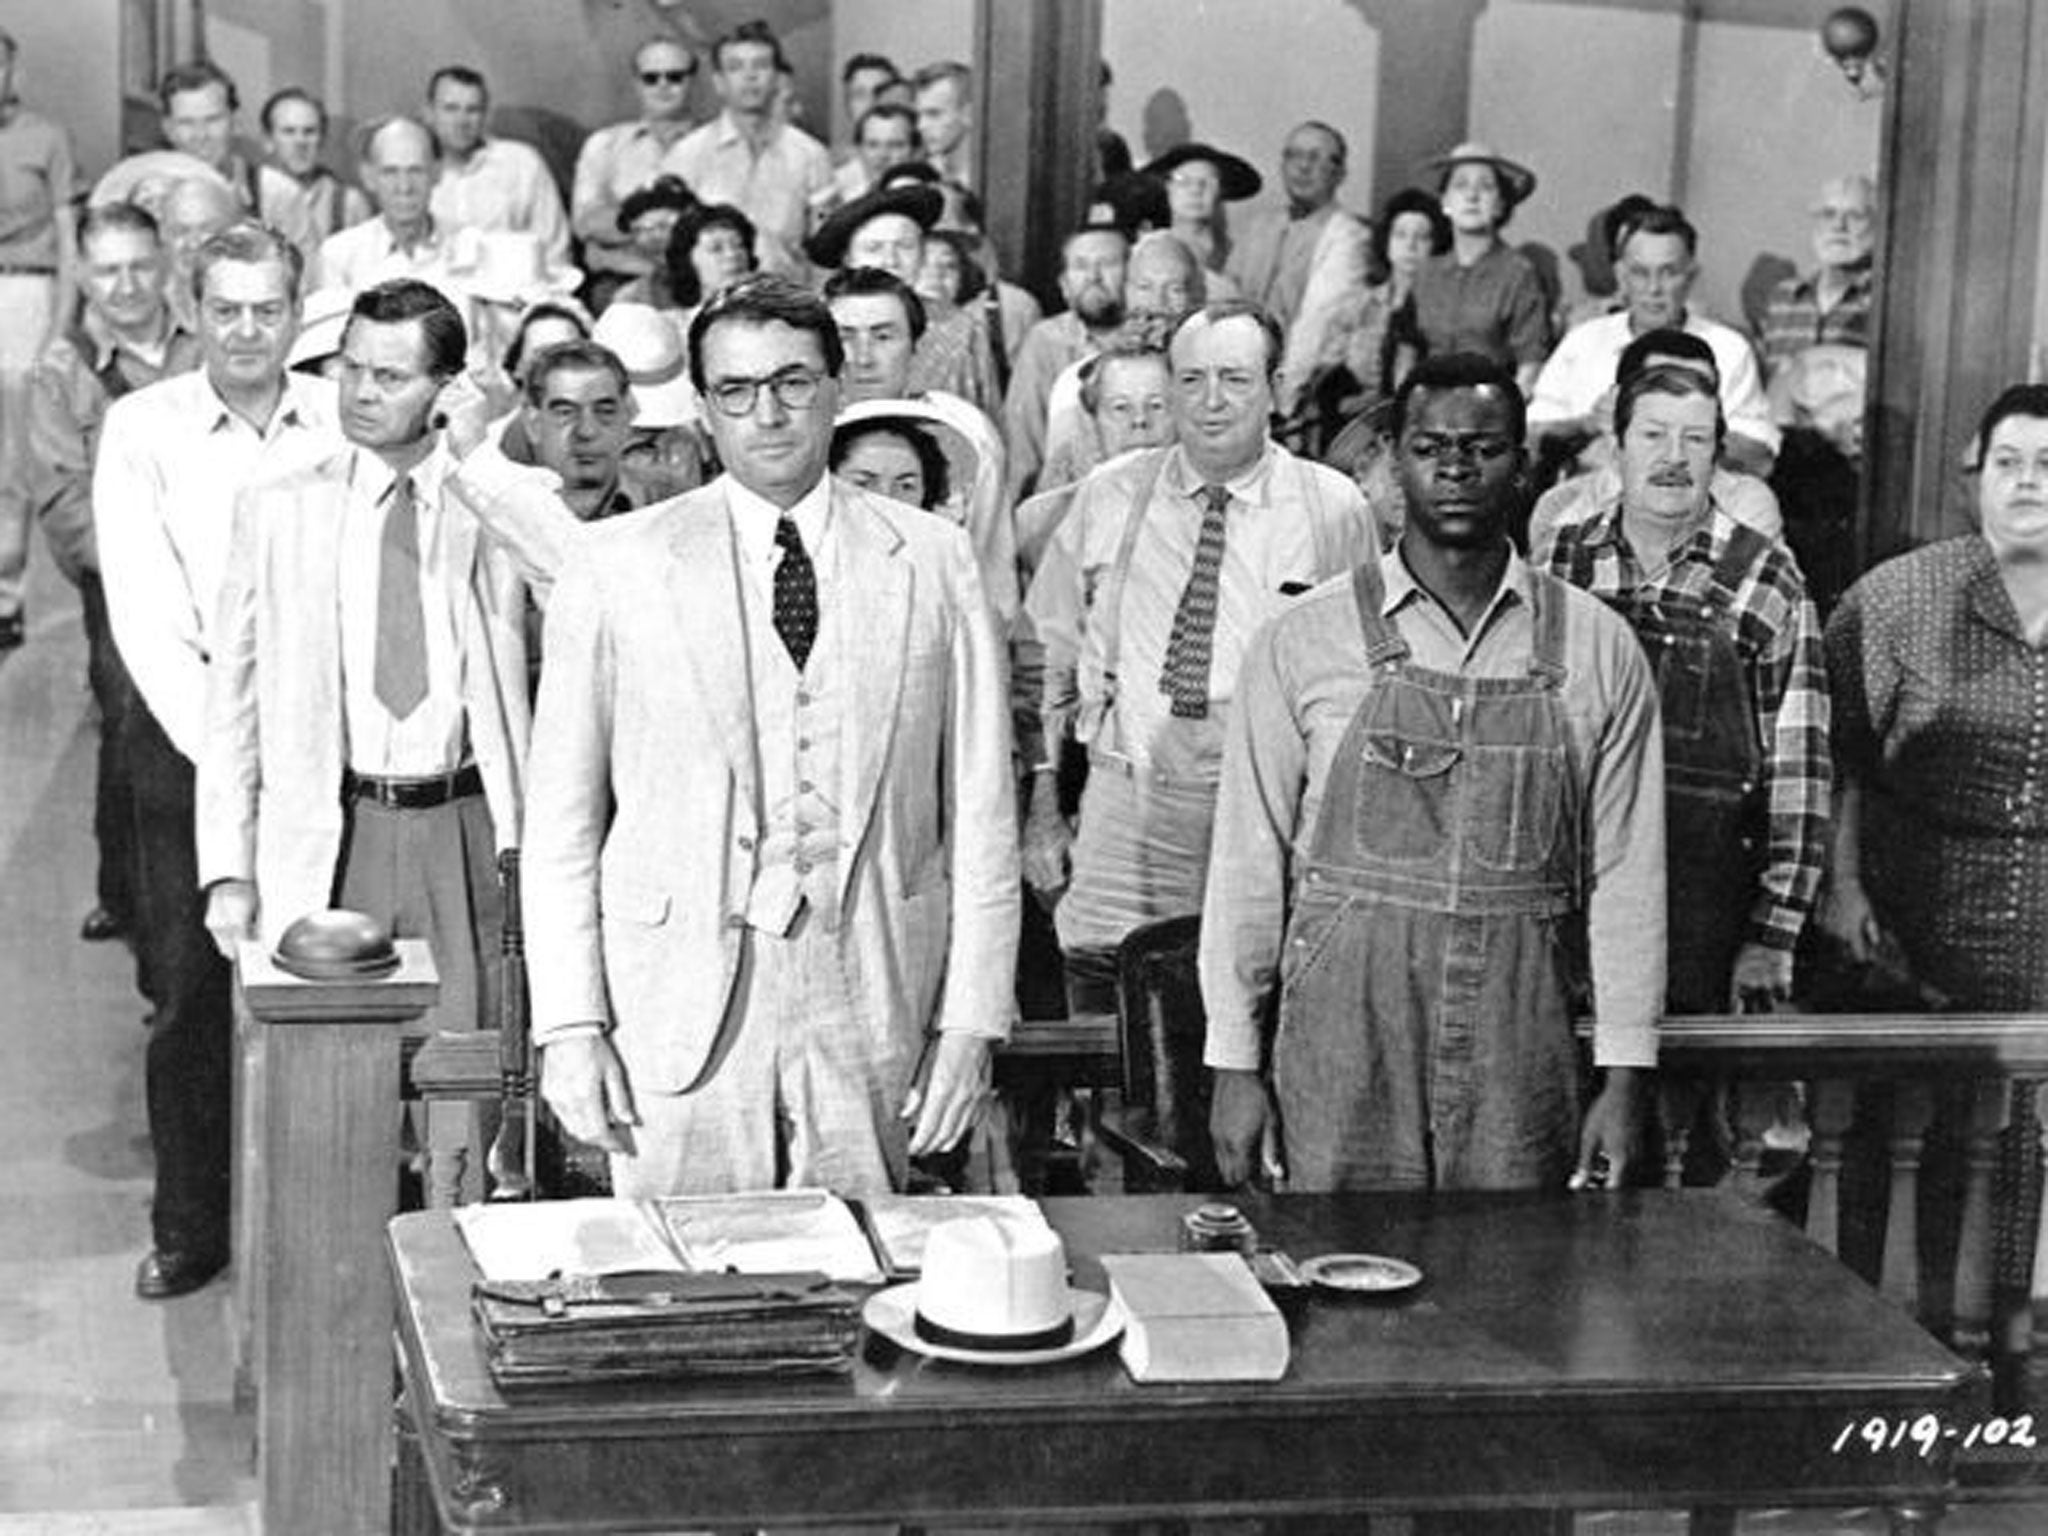 Still relevant: Gregory Peck (left) and Brock Peters (right) in a scene from the 1962 film adaptation of 'To Kill a Mockingbird'